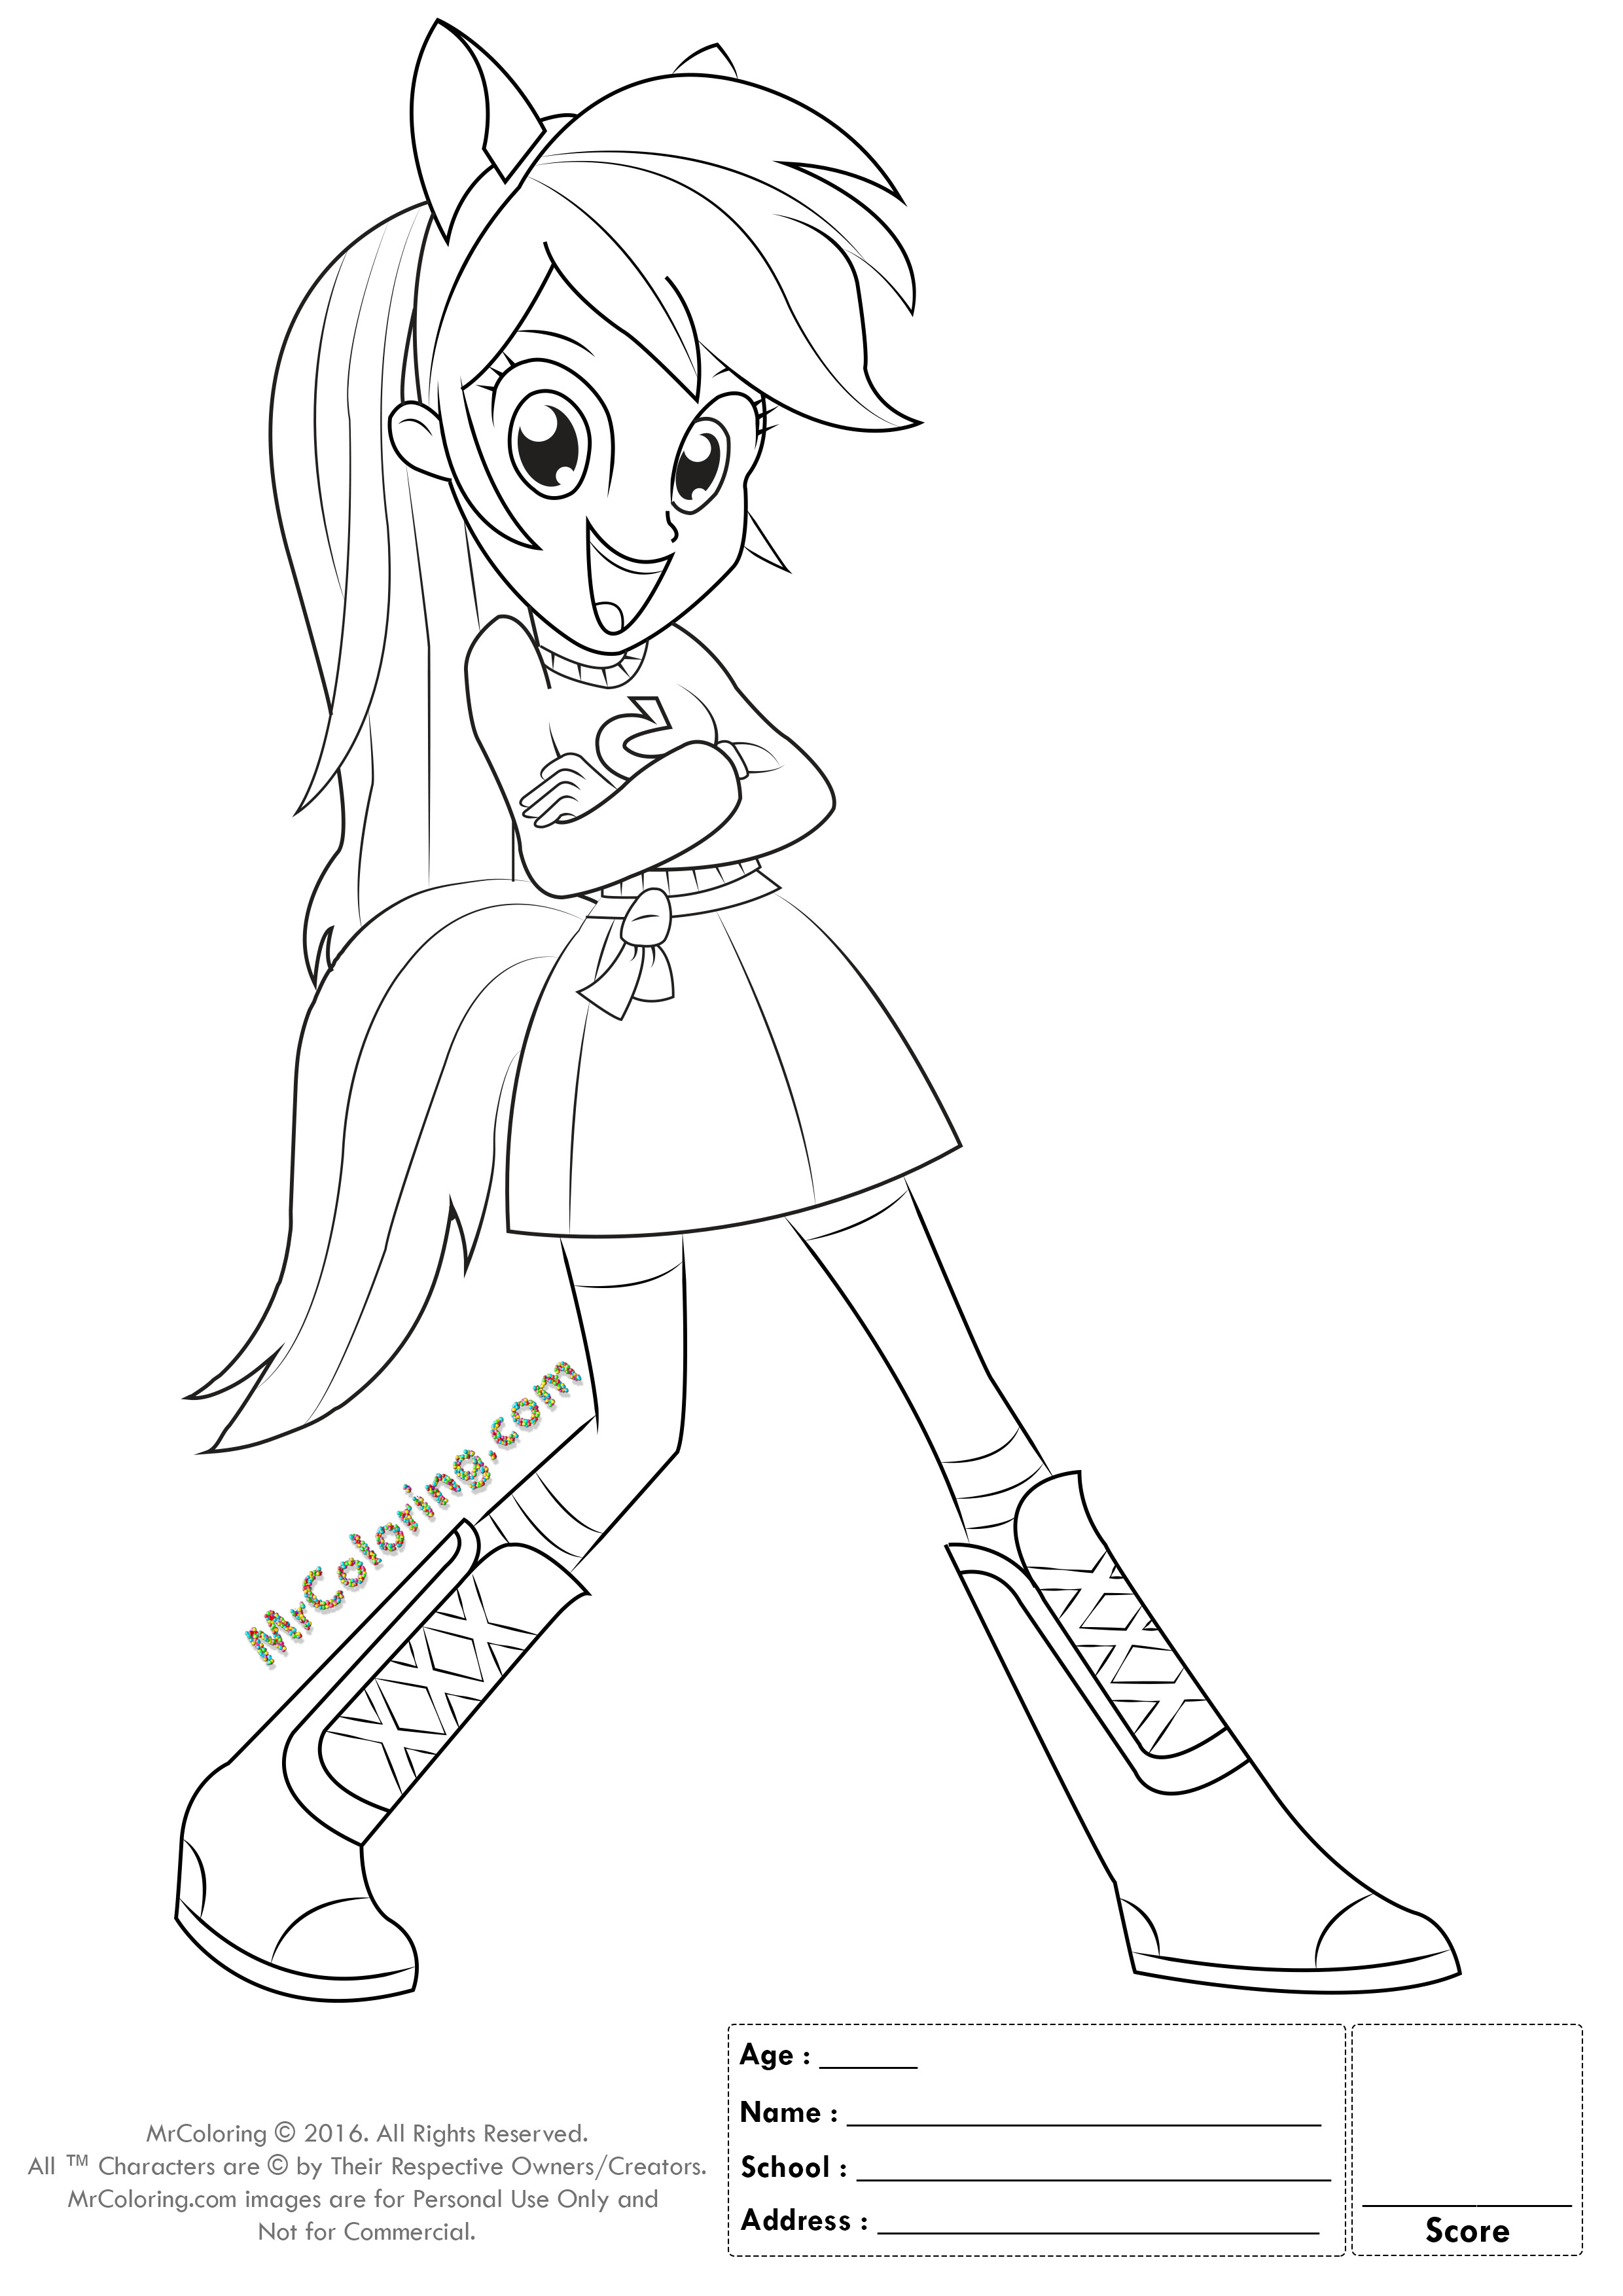 Equestria Girls Rainbow Dash Coloring Pages
 MLP Rainbow Dash Equestria Girls Coloring Pages 3